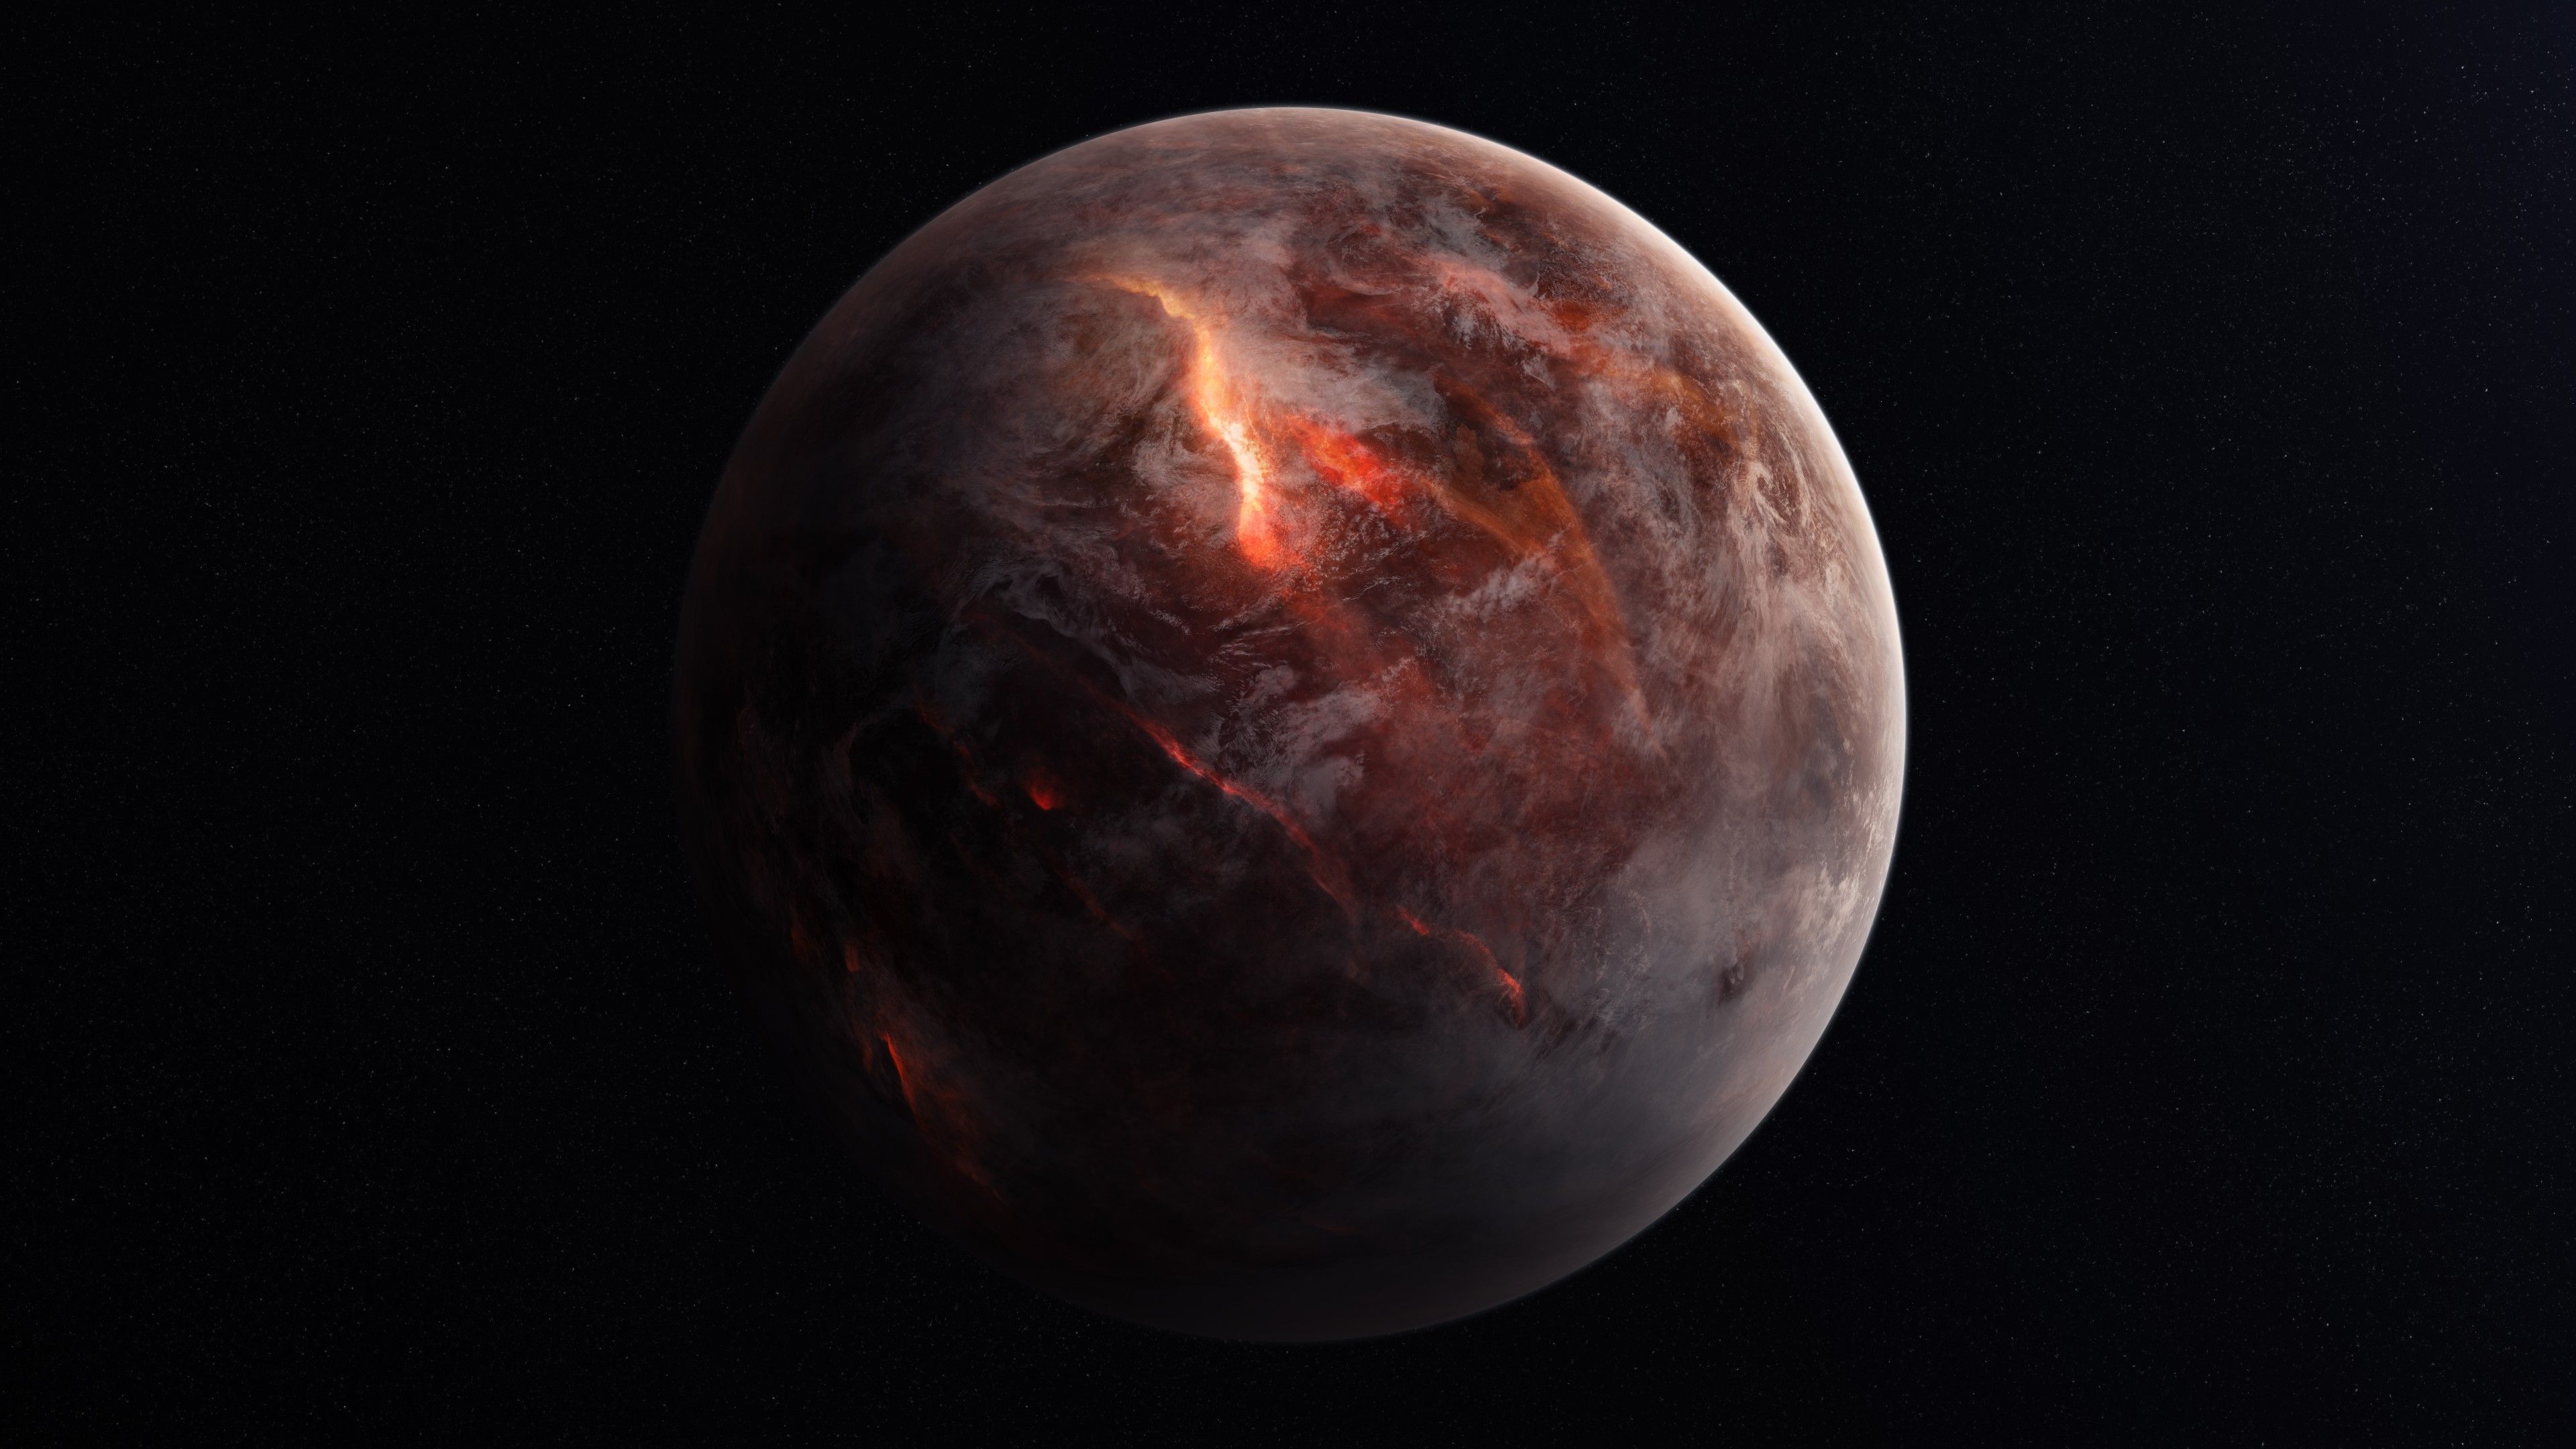 A large, red planet with flames coming out of it - Planet, space